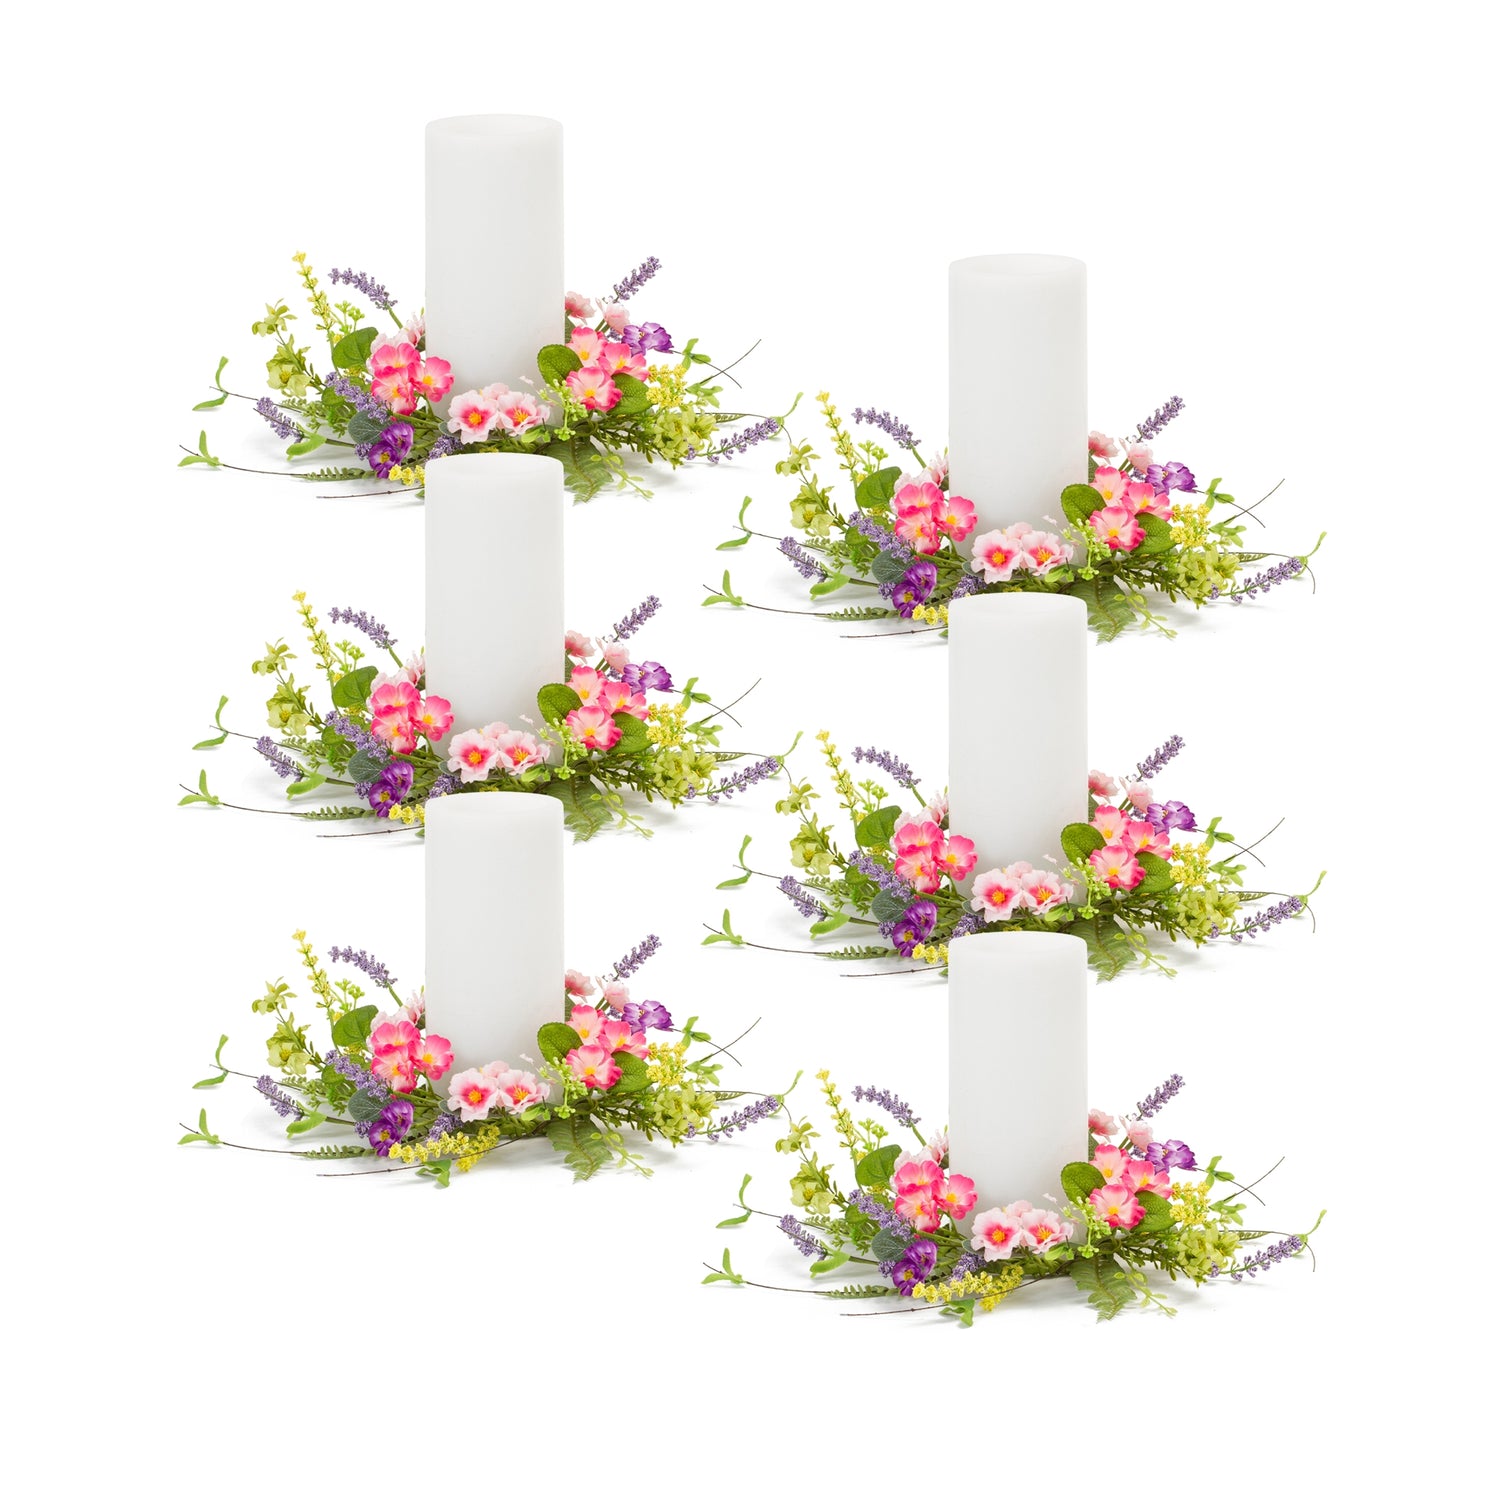 Mixed Floral Candle Ring (Set of 6) 12.5"D Polyester/Plastic (Fits a 4" Candle)